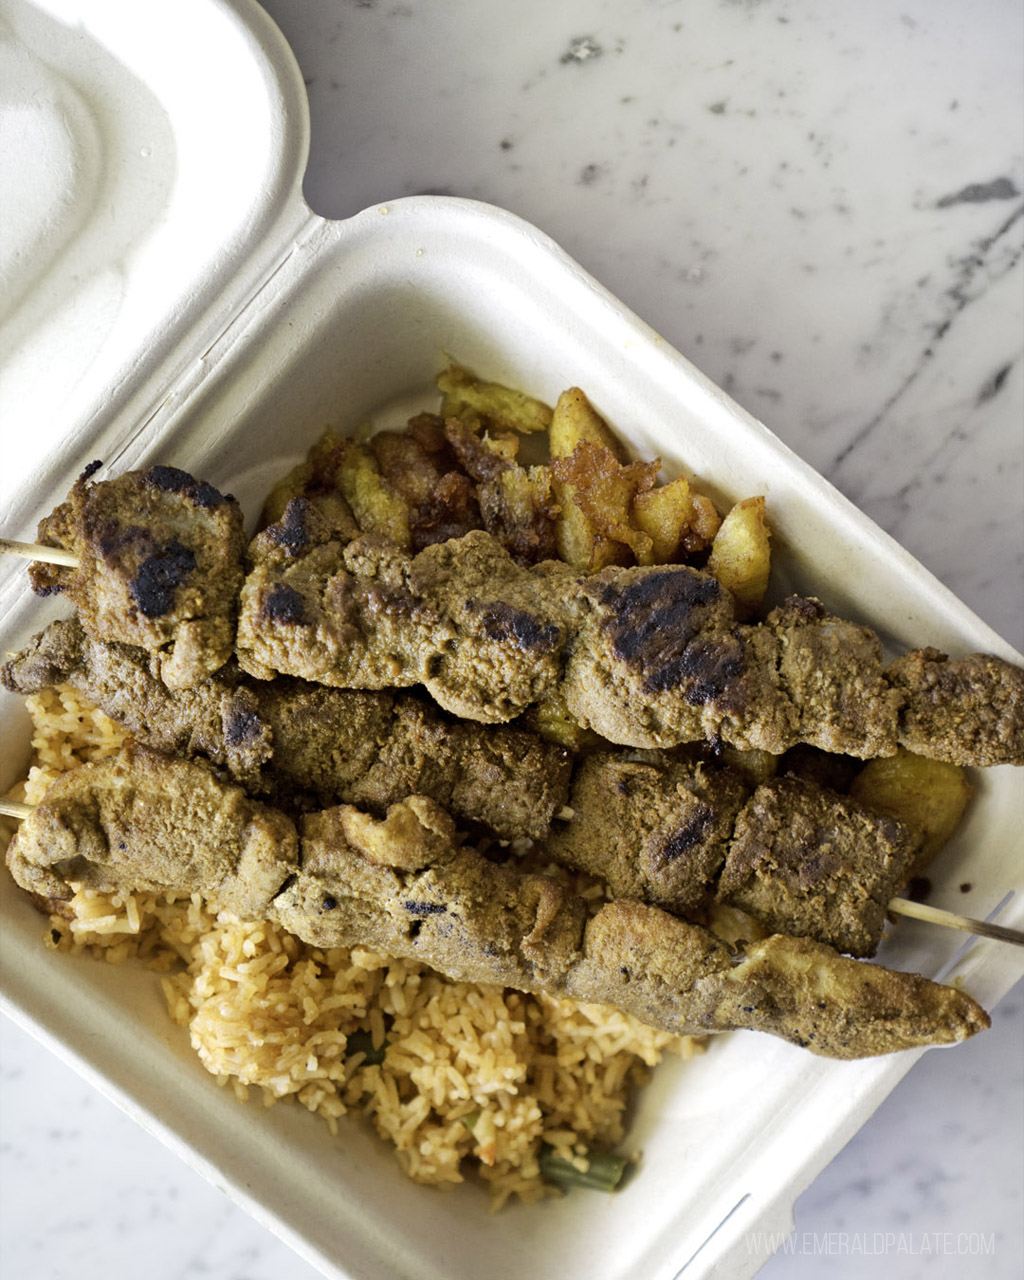 takeout container of meat skewers from a Black-owned Seattle restaurant